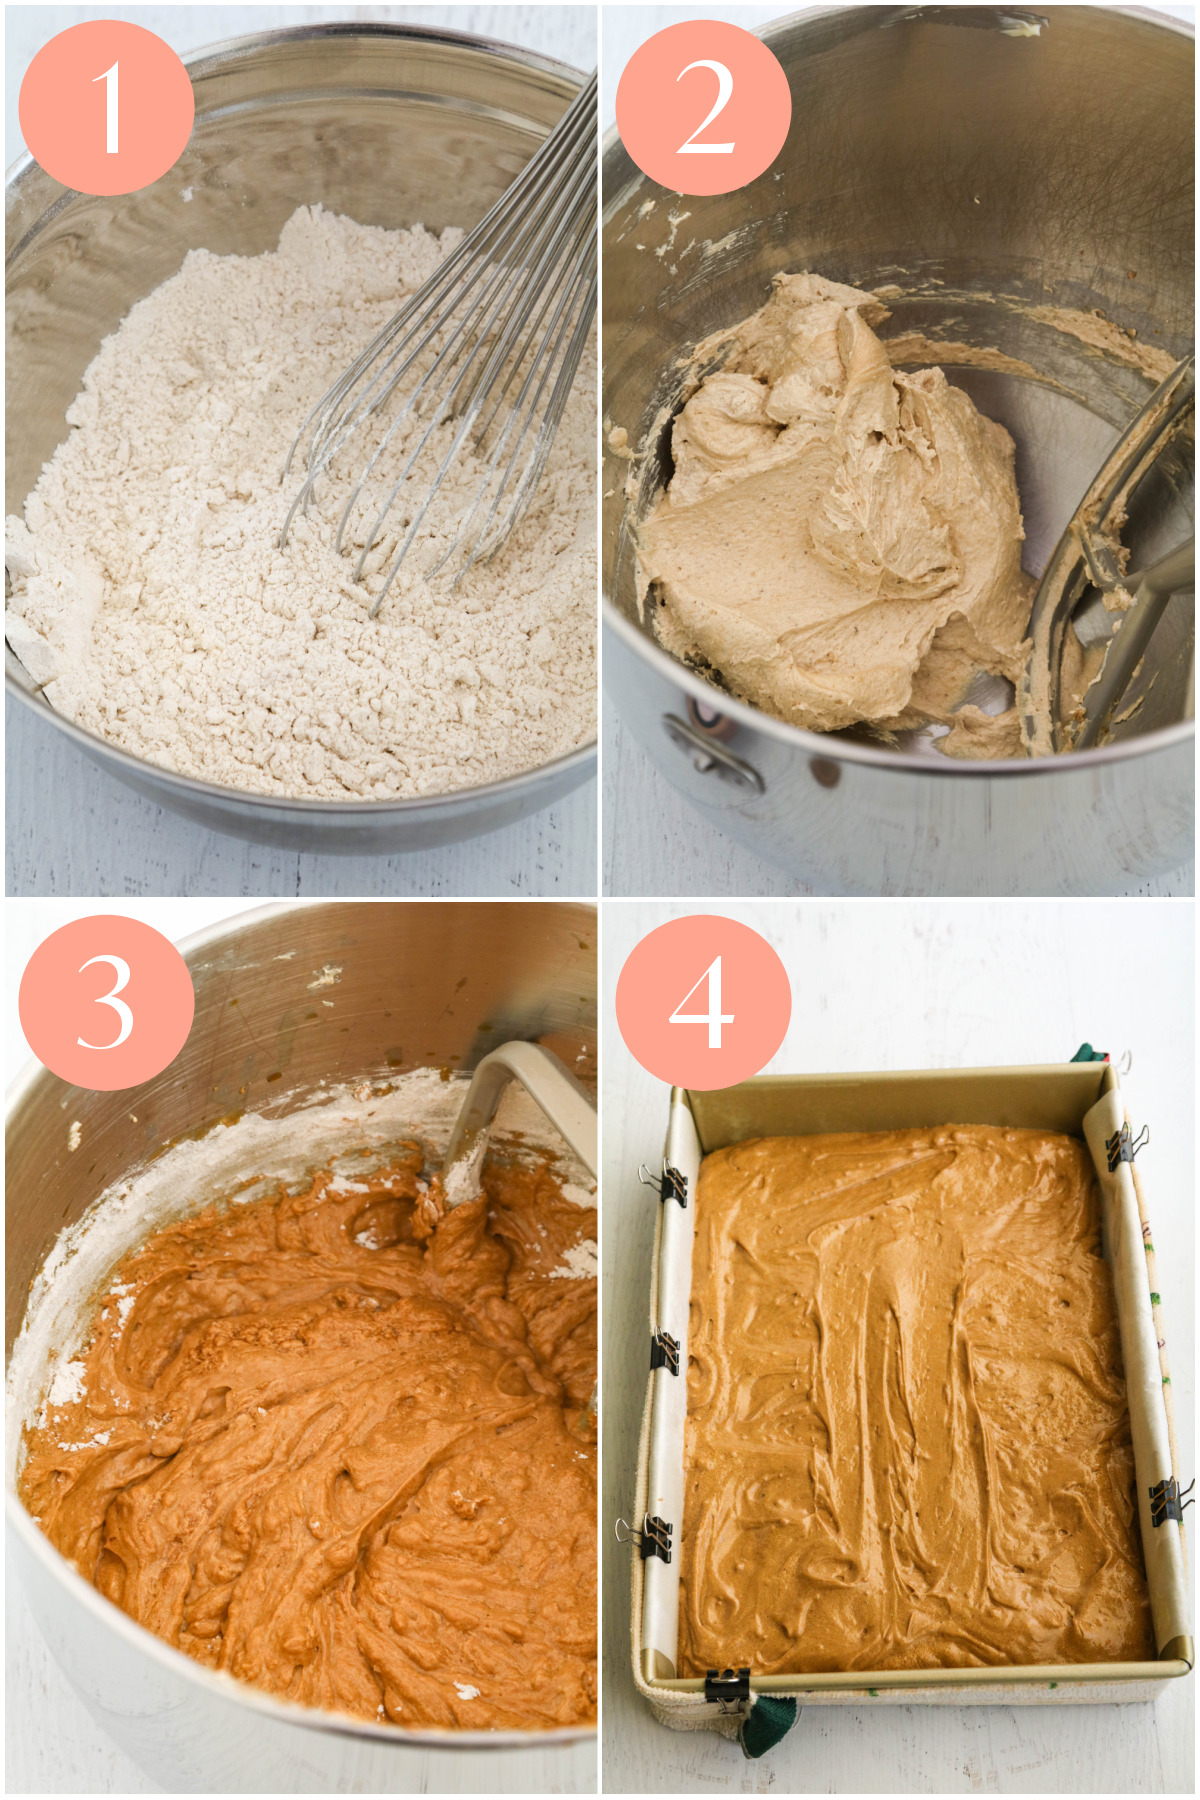 https://www.pookspantry.com/wp-content/uploads/2022/10/how-to-make-gingerbread-cake.jpg